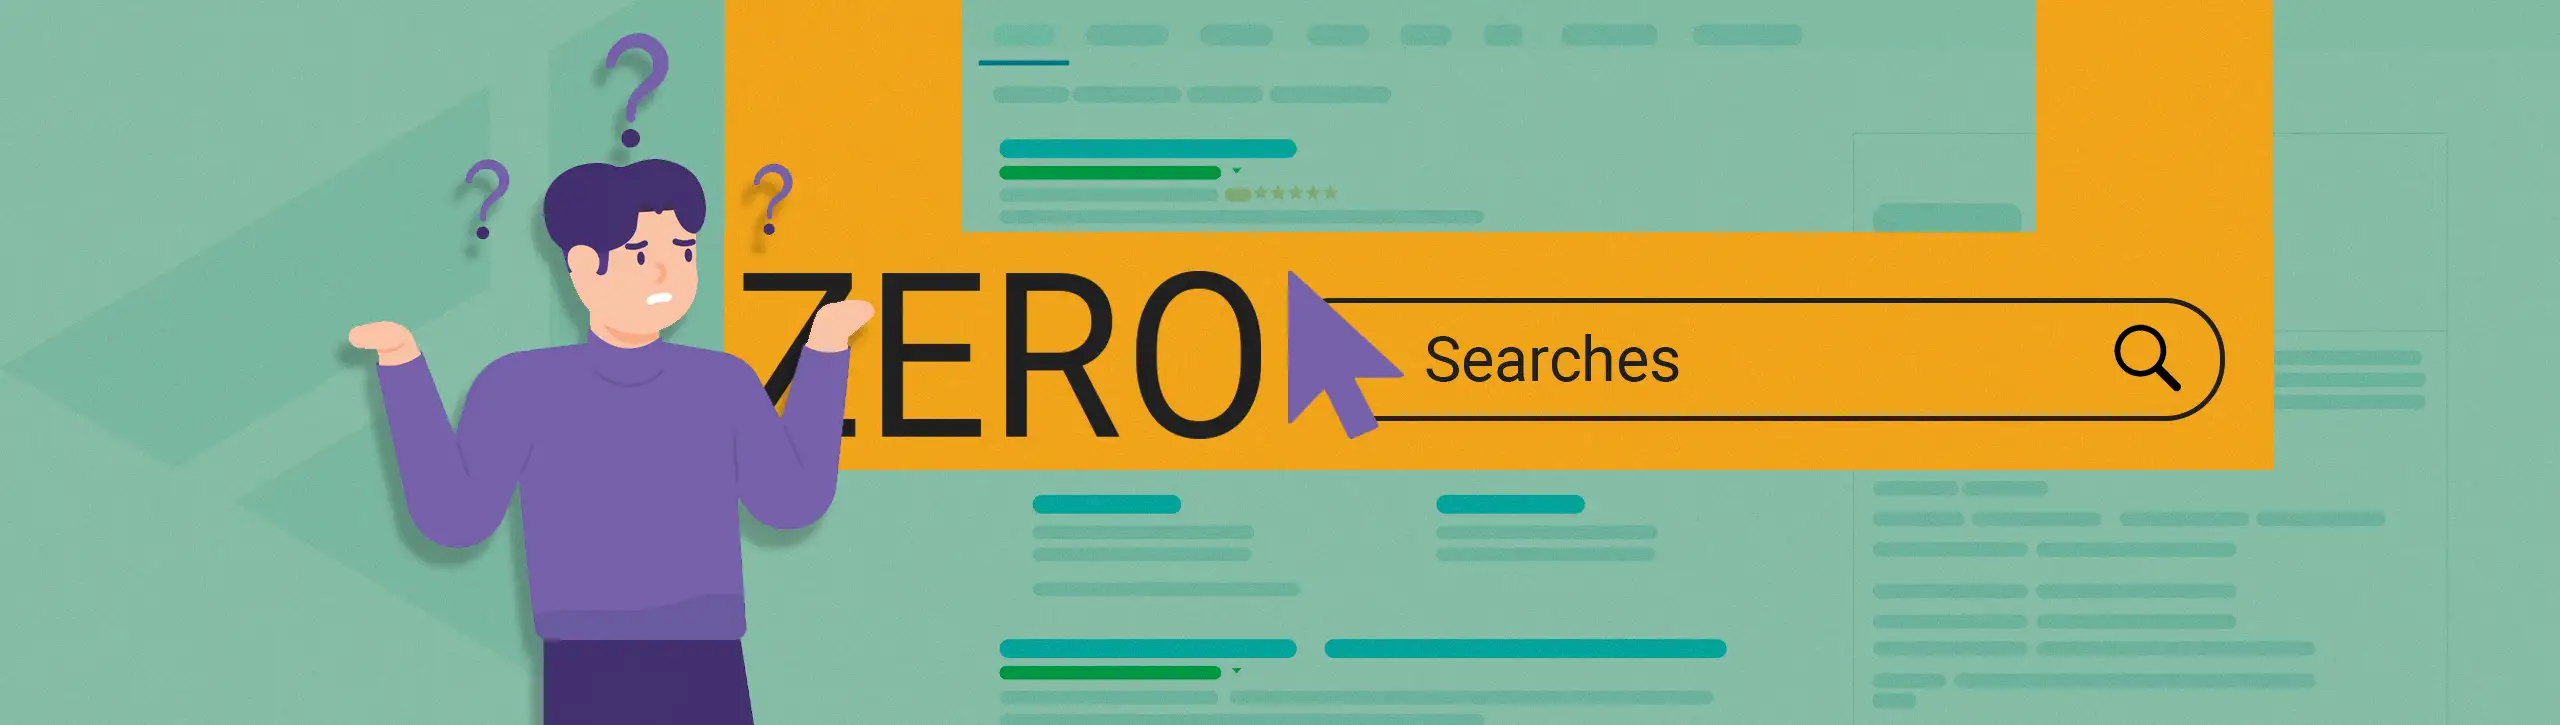 What Are Zero-Click Searches? | Their Impact in 2022 | MRS Digital